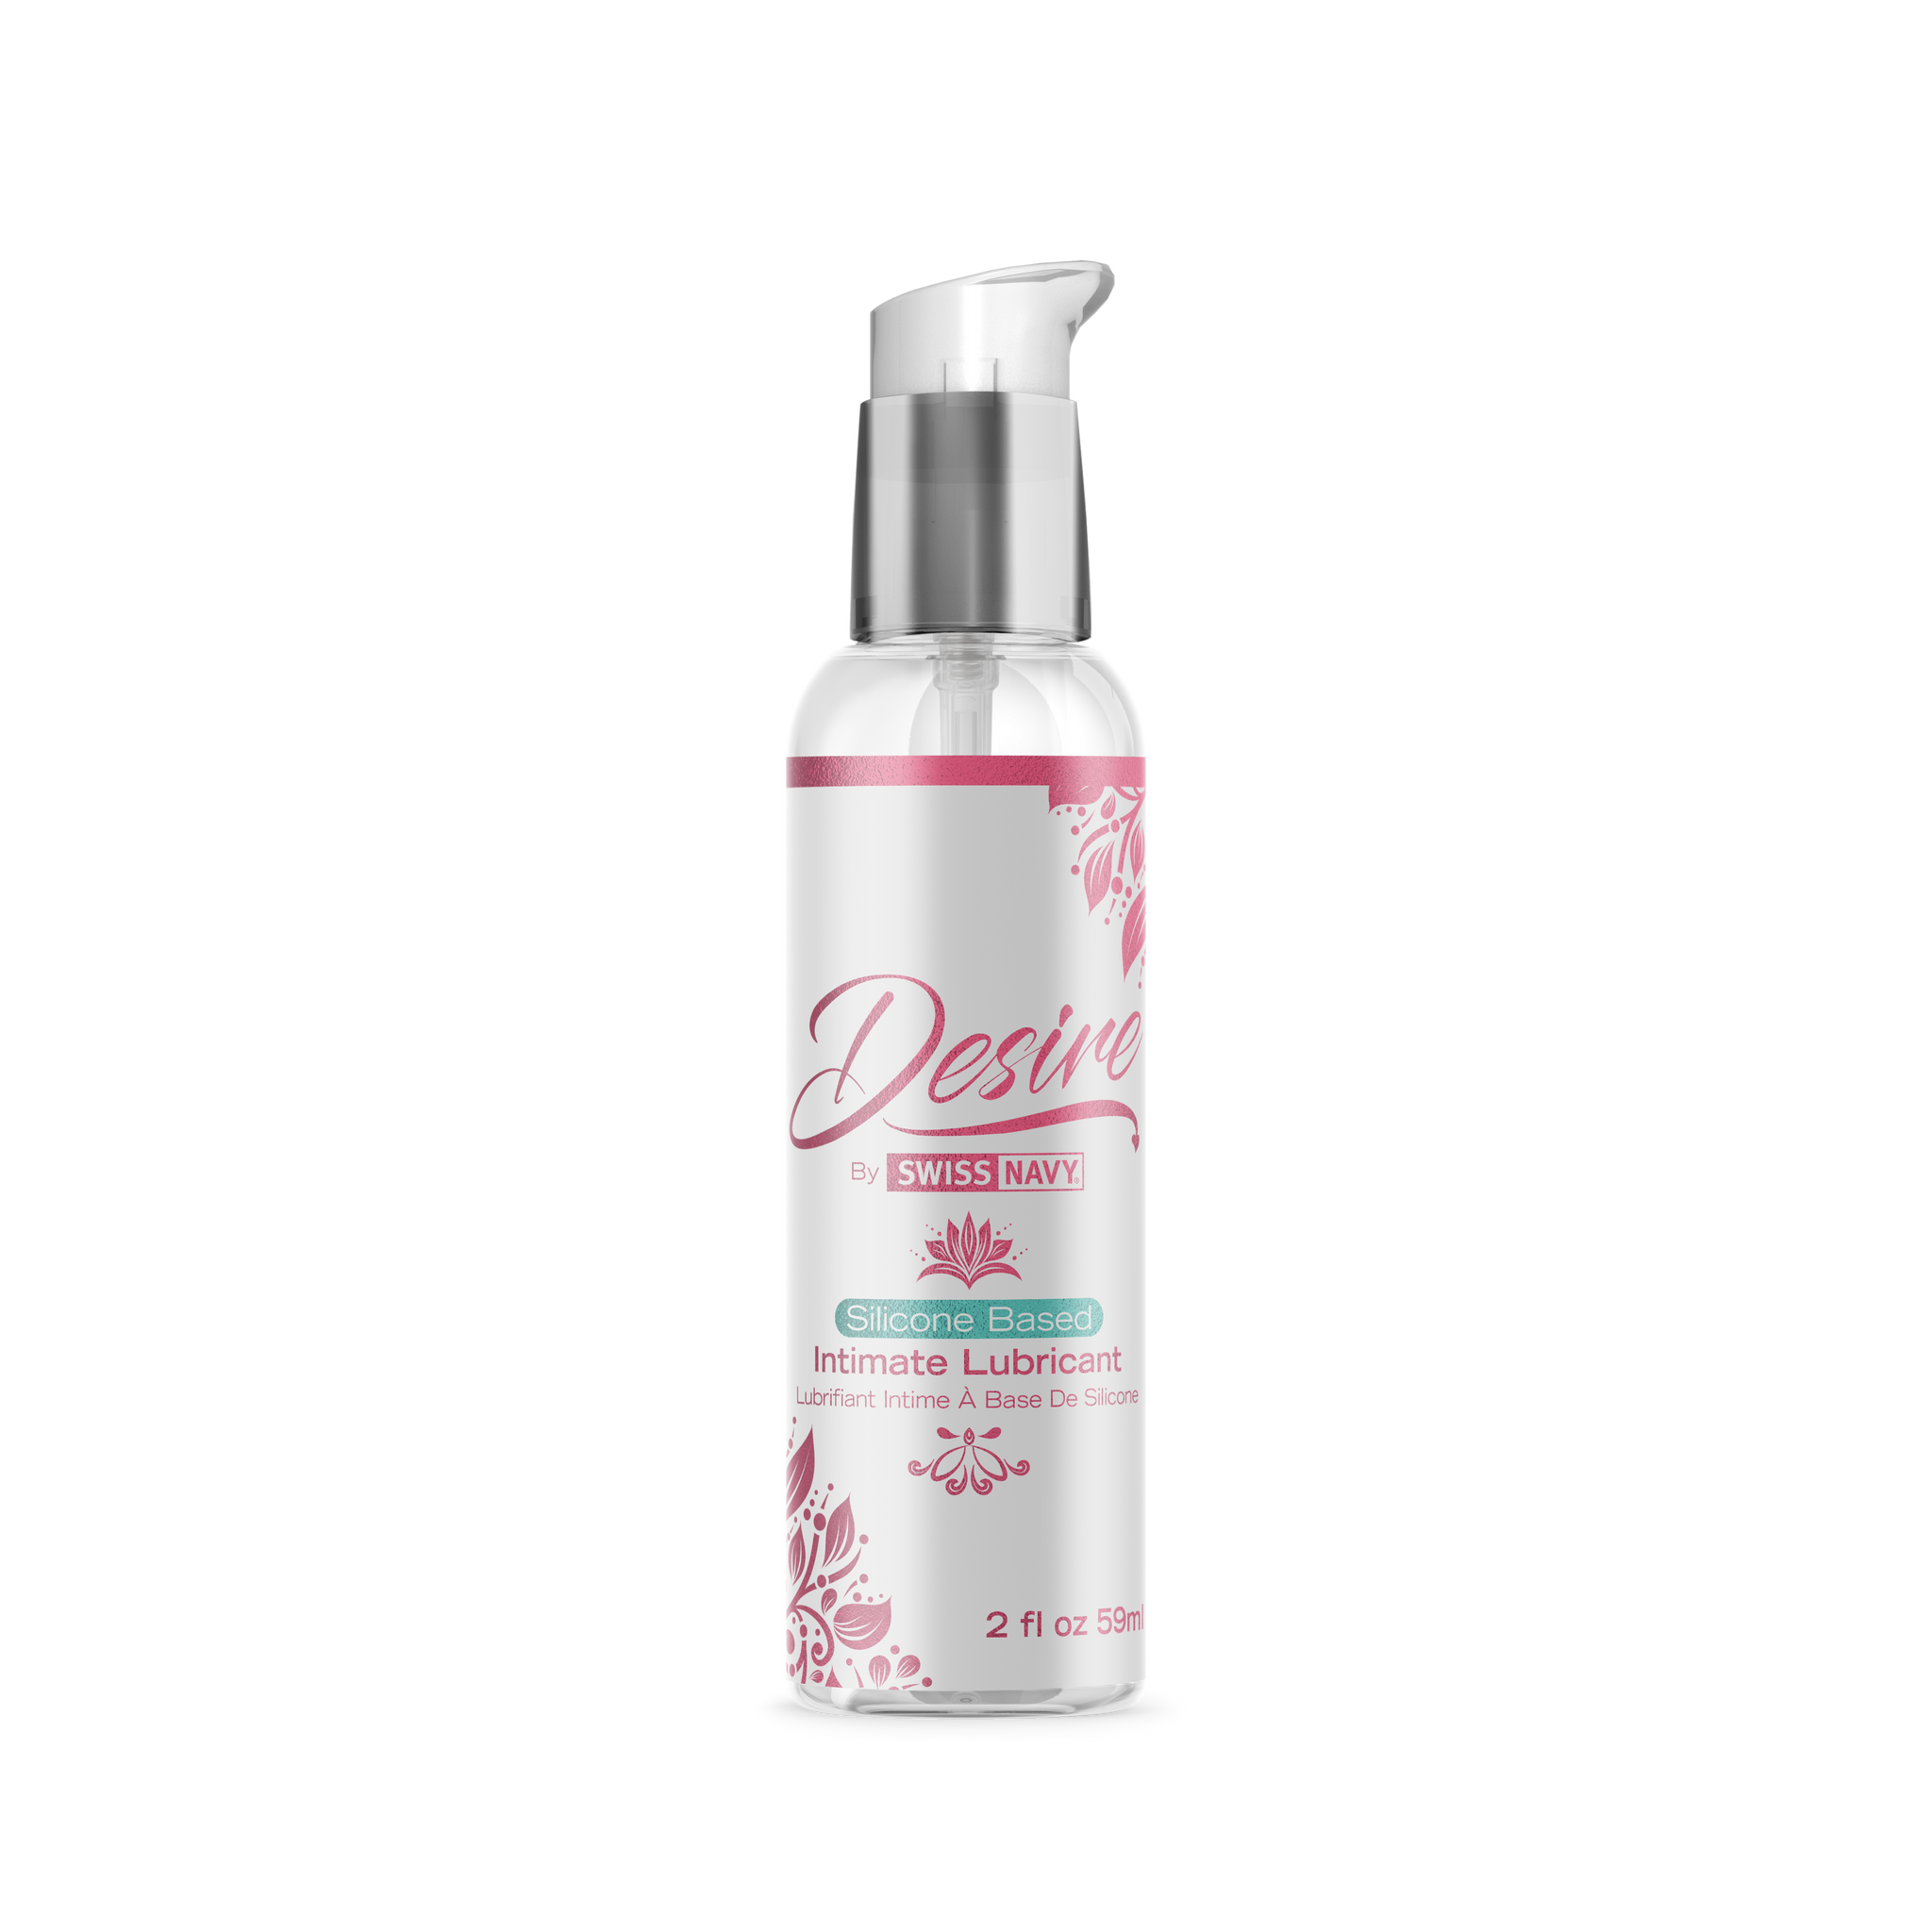 Desire by Swiss Navy, Silicone Intimate Lubricant